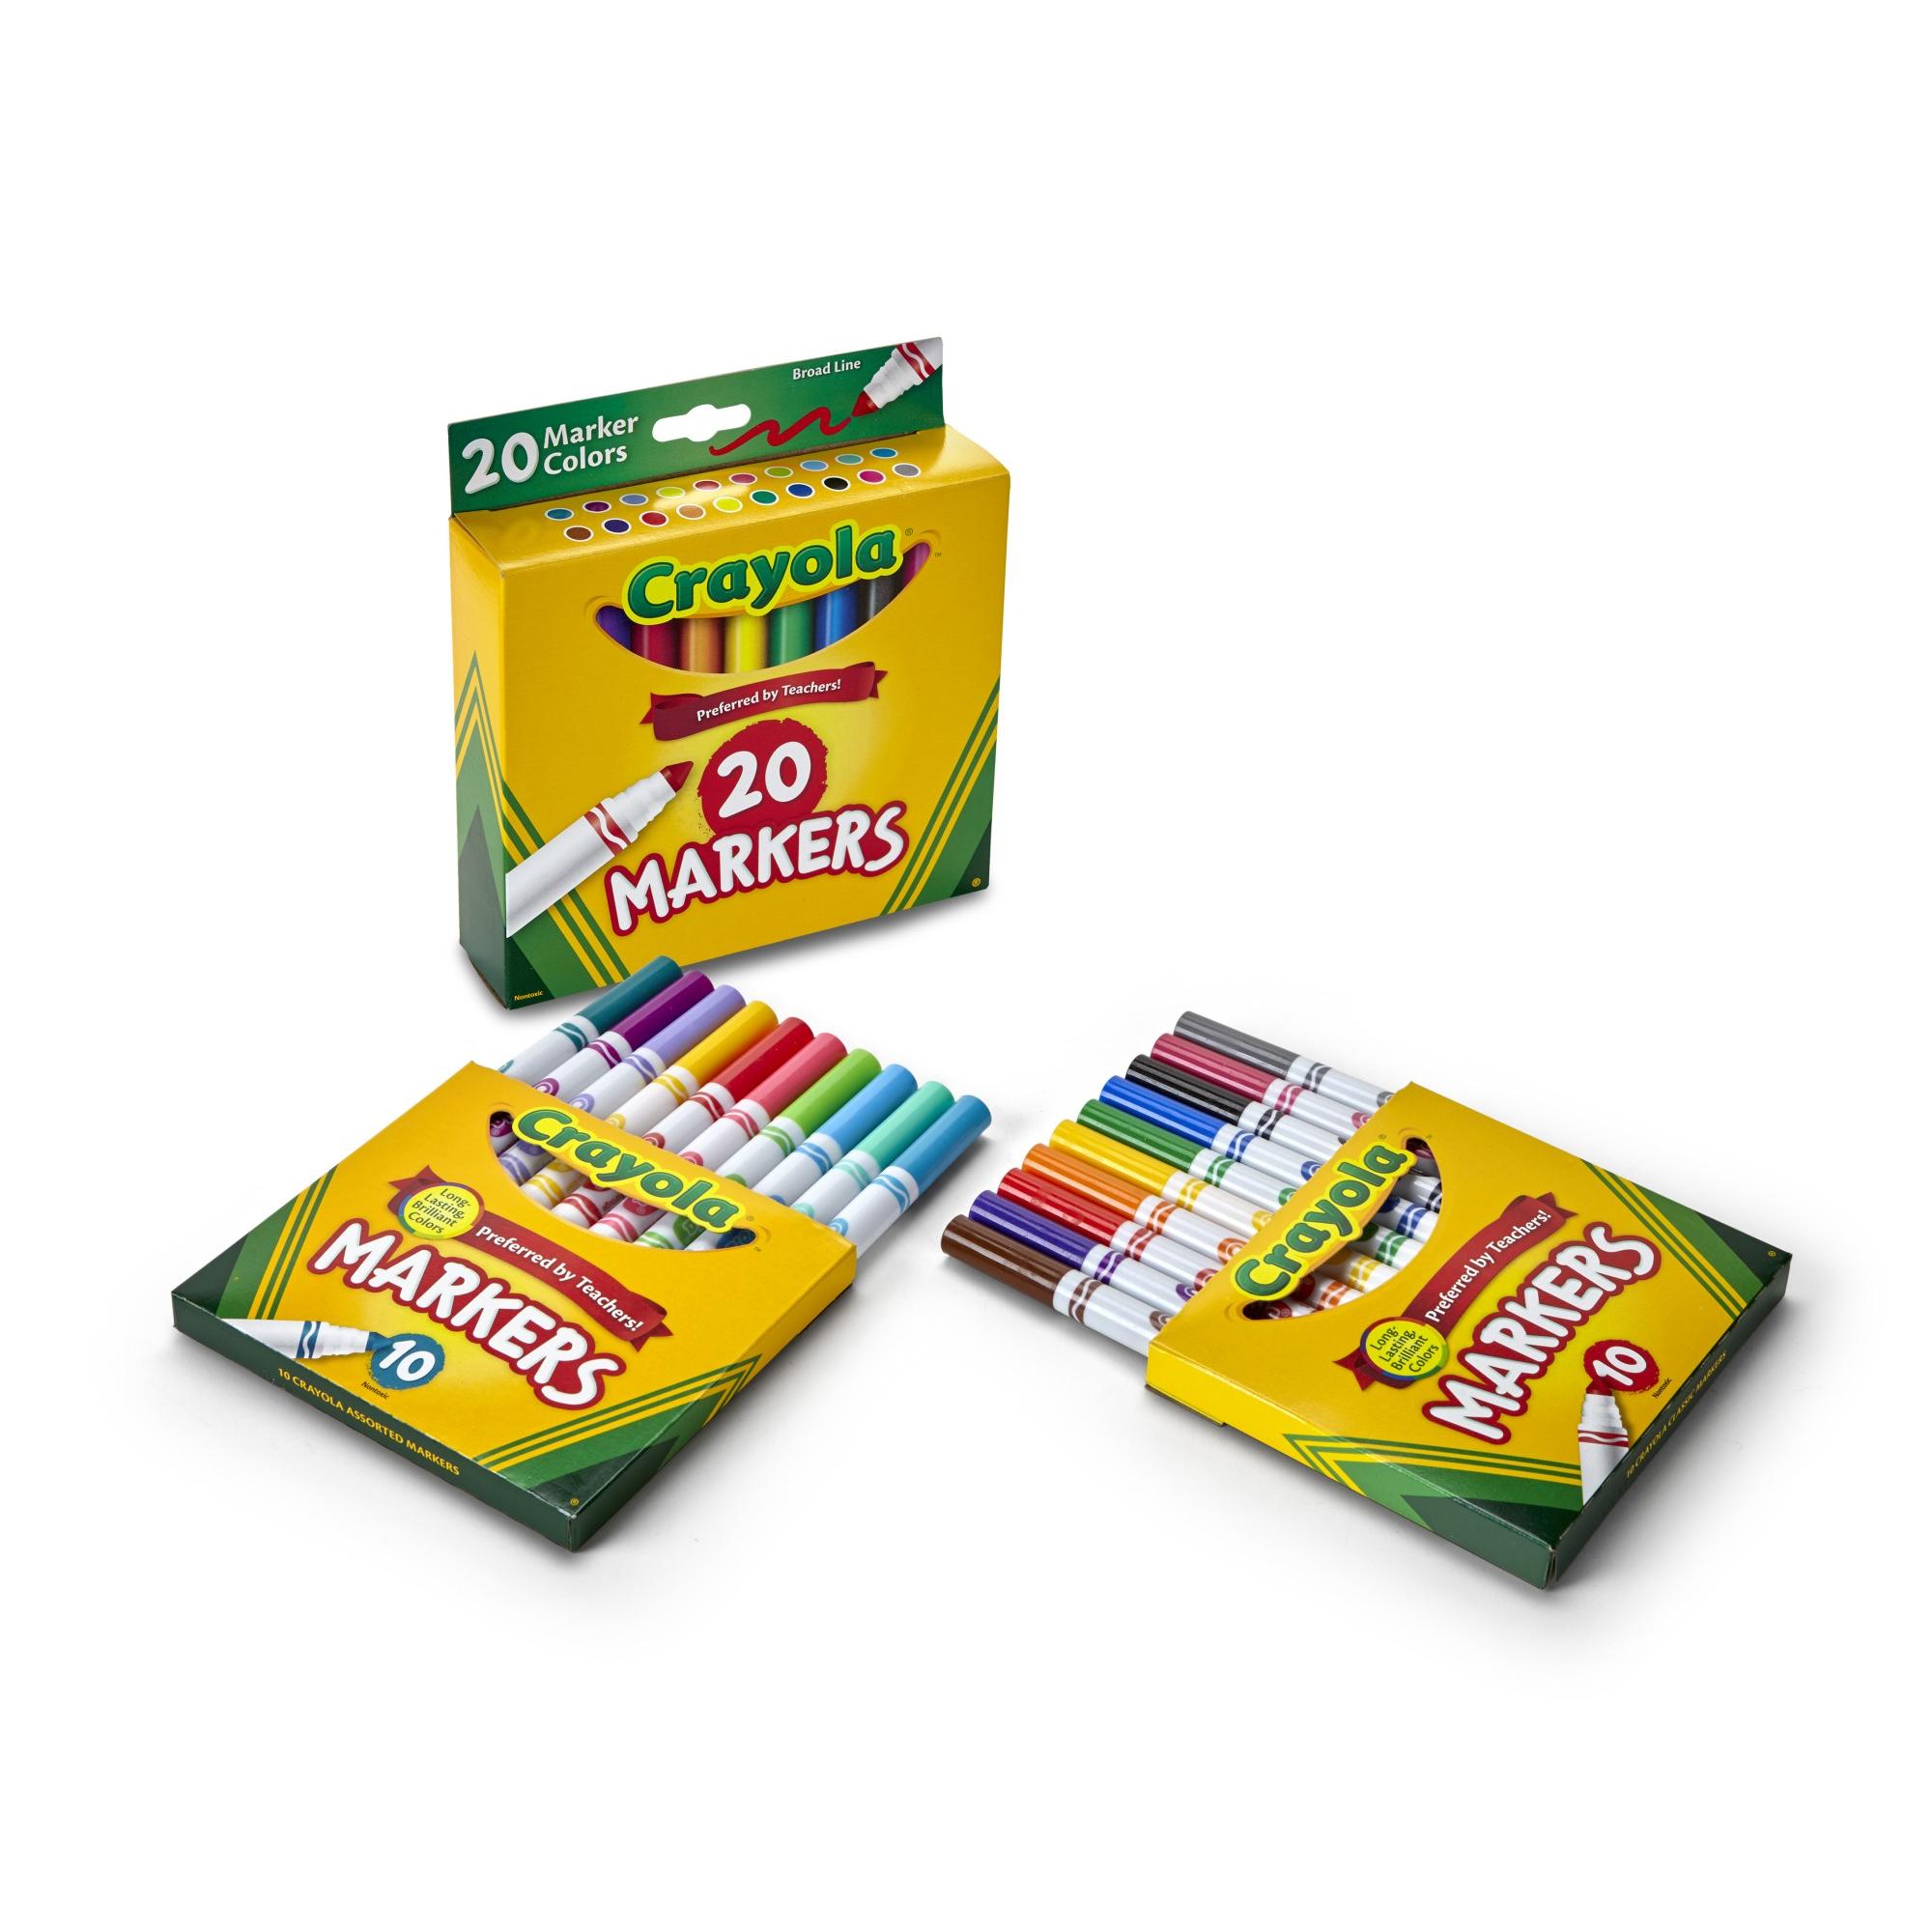 Crayola Broad Line Markers, 20 Ct, School Supplies, Easter Basket Stuffers, Classic Colors, Child - image 2 of 8